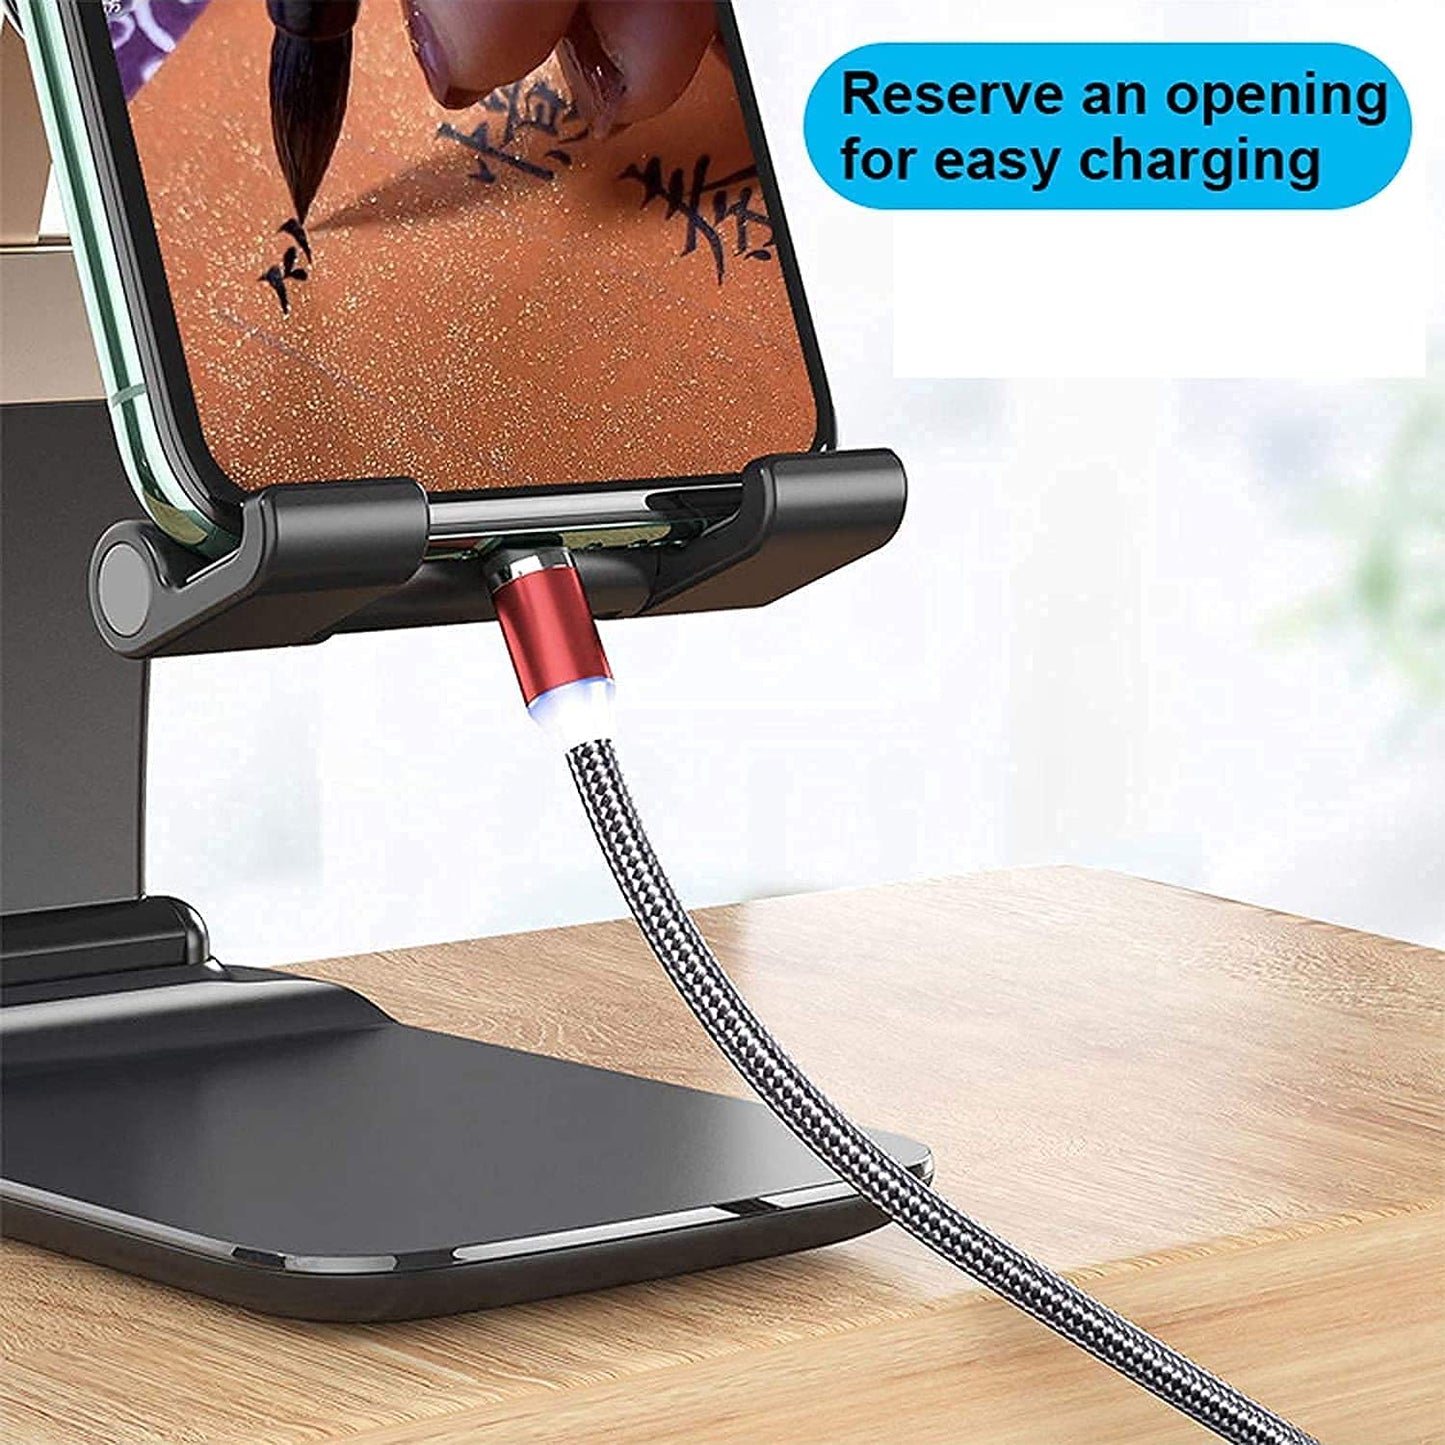 Desk Phone Holder Foldable, Small and Flexible